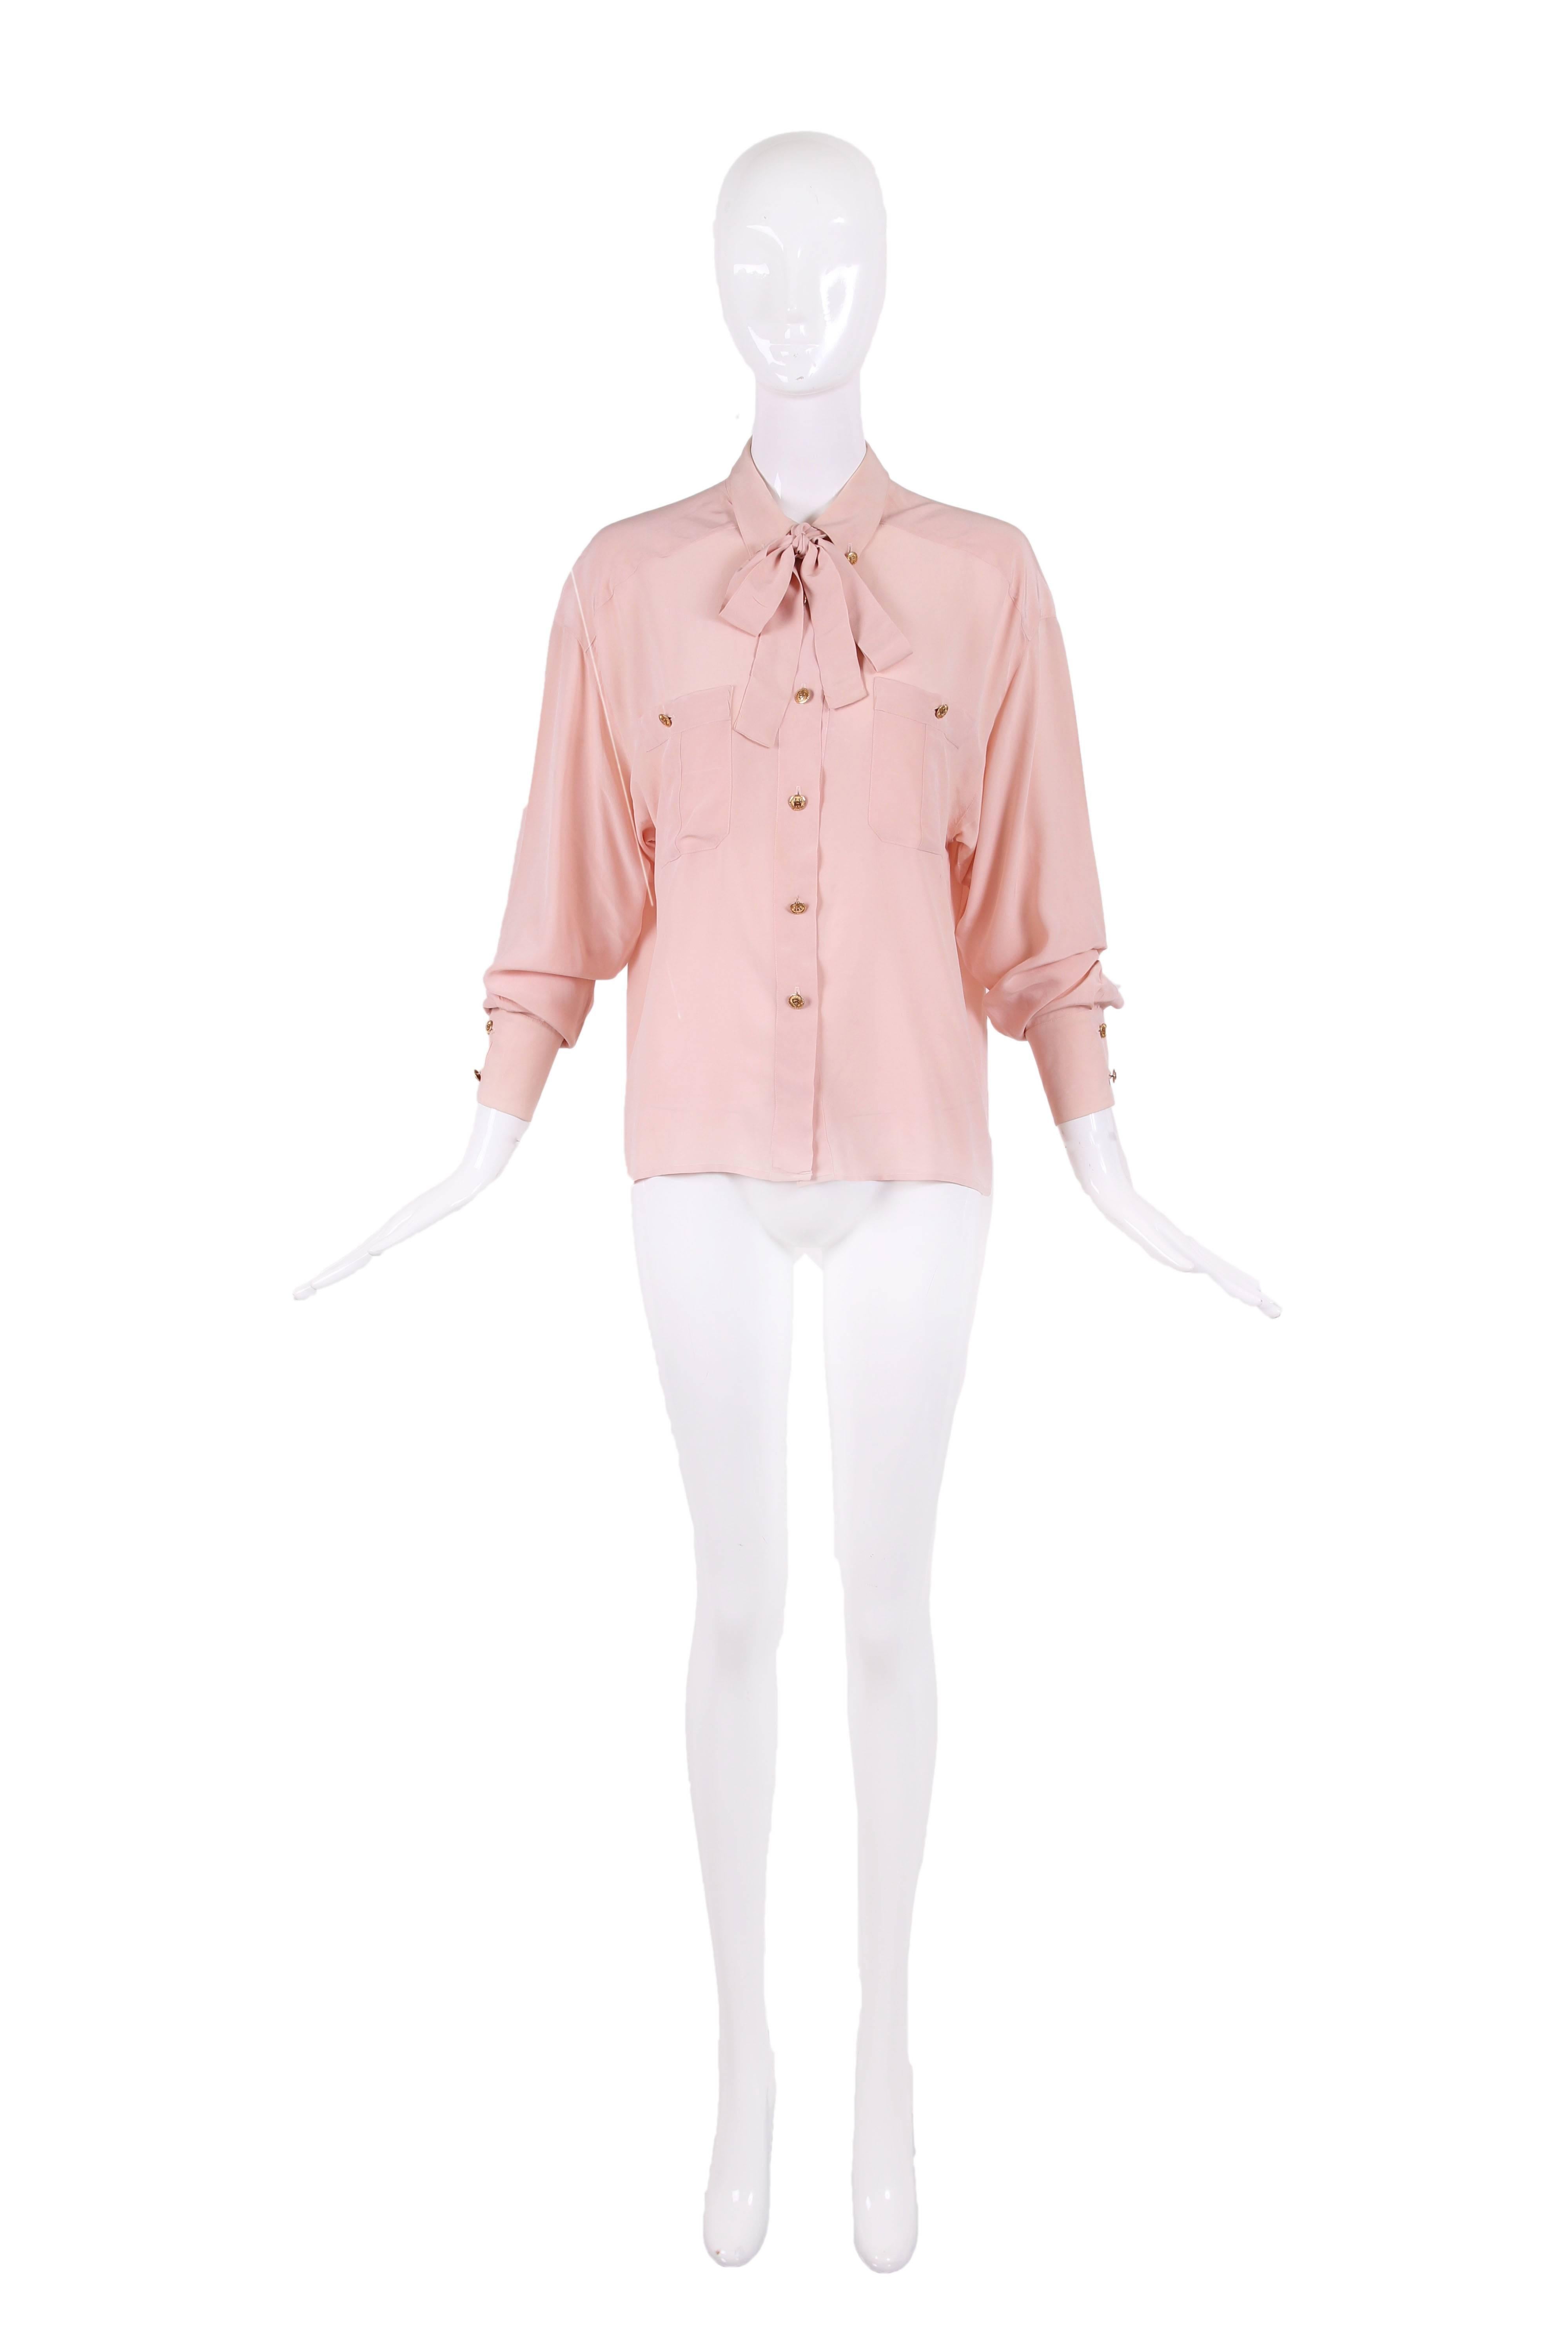 Vintage Chanel pale pink long sleeve collared button down silk blouse. This blouse has two front pockets, neck ties, and dolman sleeves. There are gold-toned 